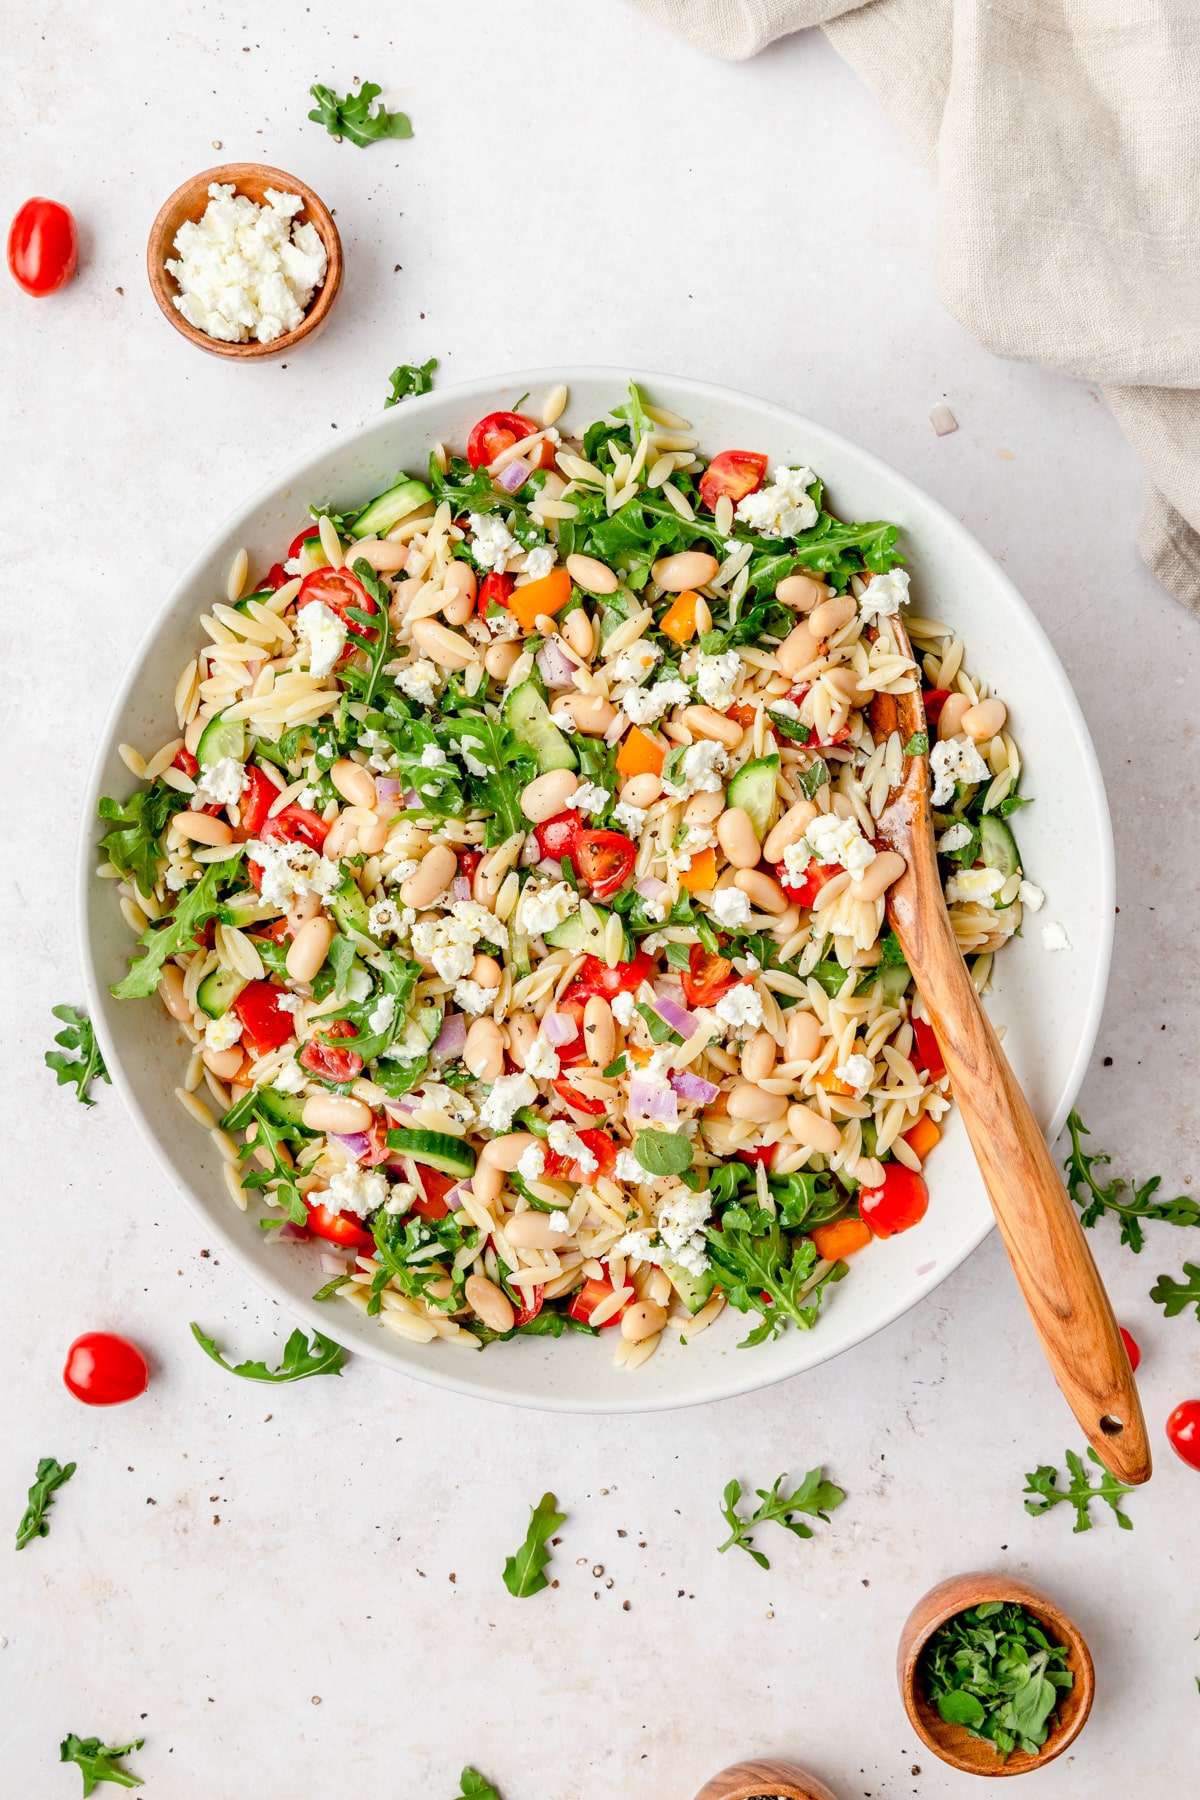 orzo white bean salad with arugula and goat cheese.